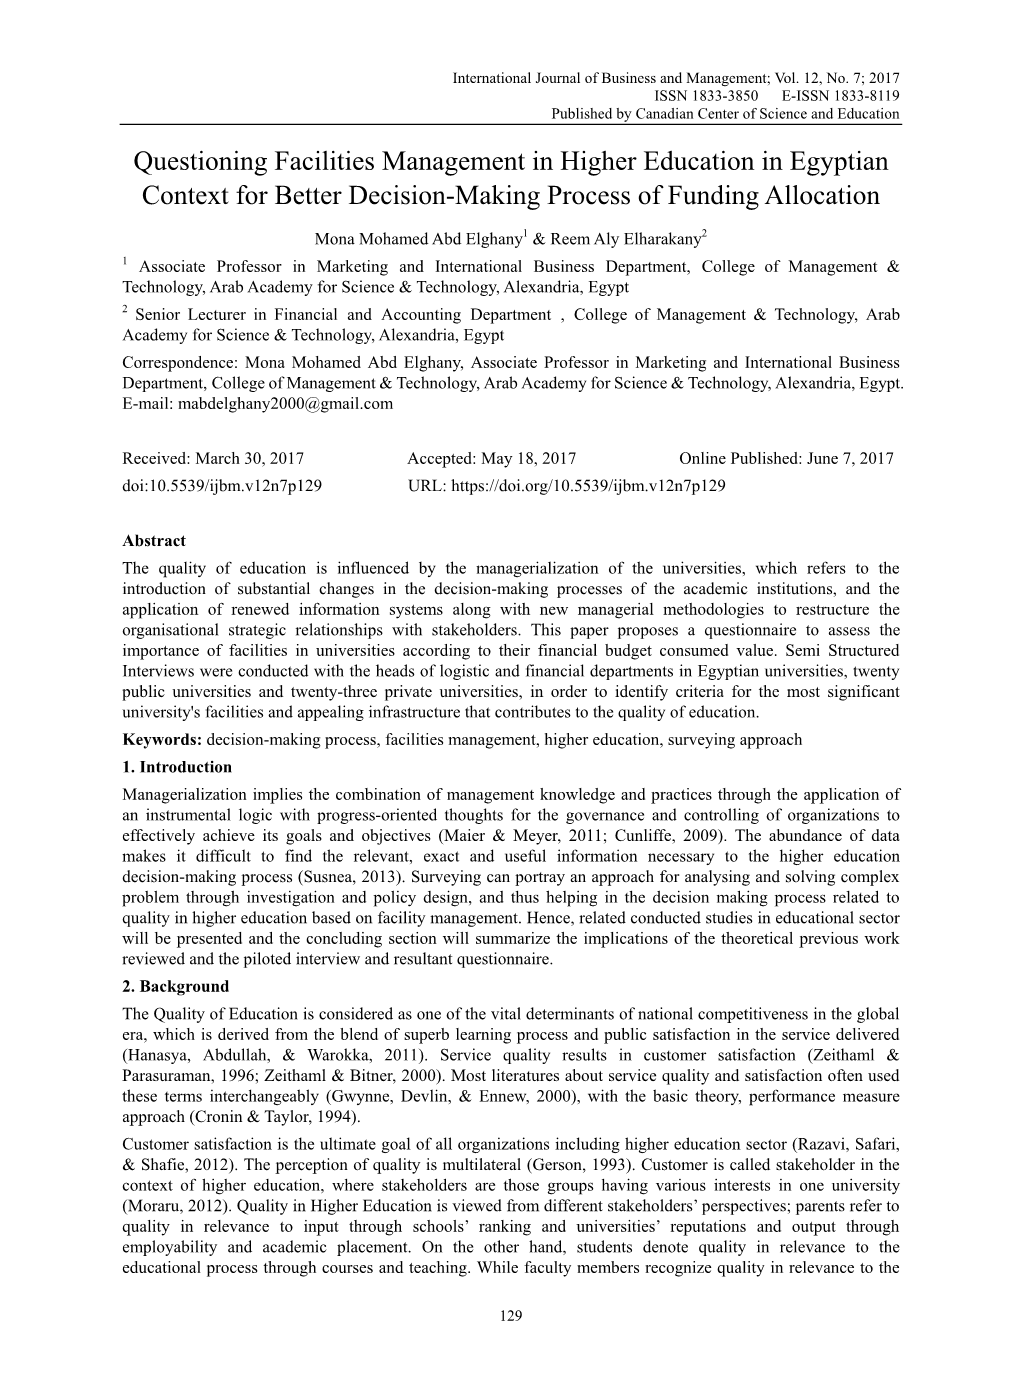 Questioning Facilities Management in Higher Education in Egyptian Context for Better Decision-Making Process of Funding Allocation